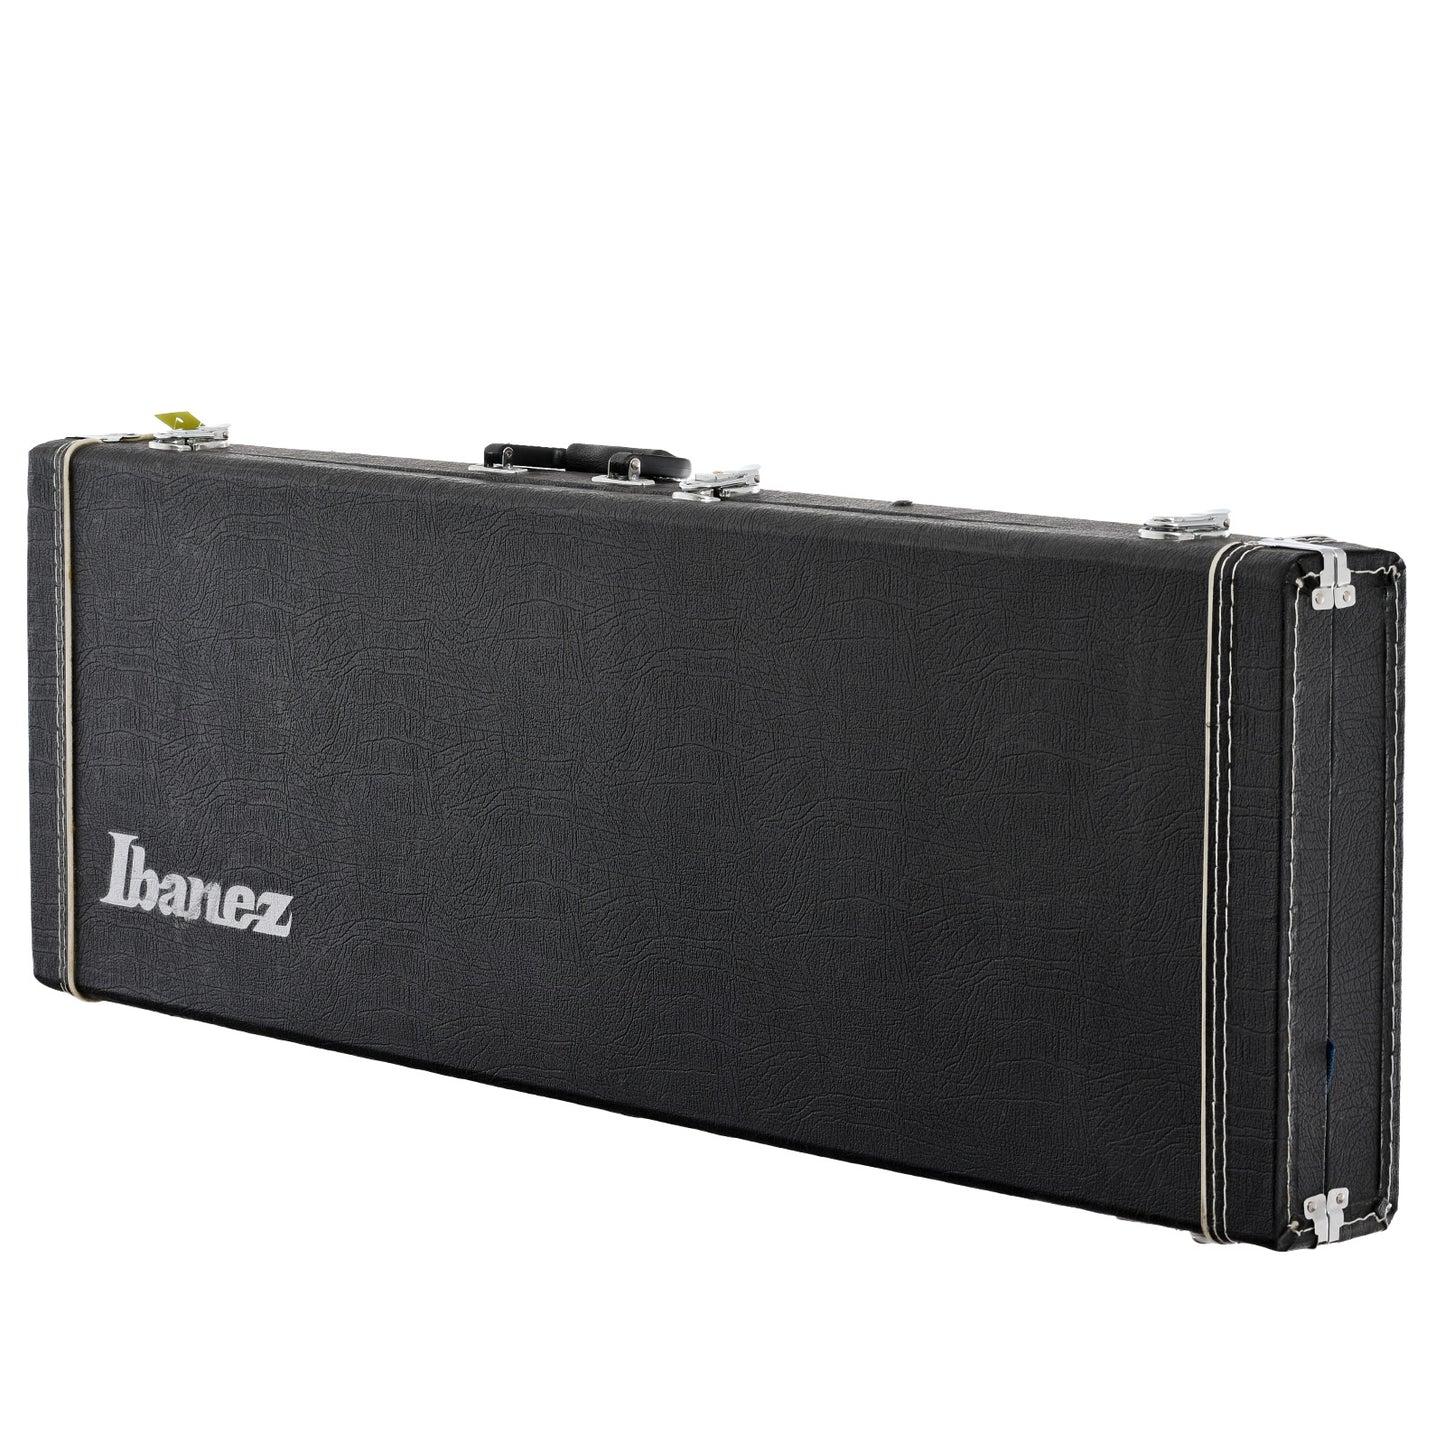 Case for Ibanez RG-350 Deluxe Electric Guitar 